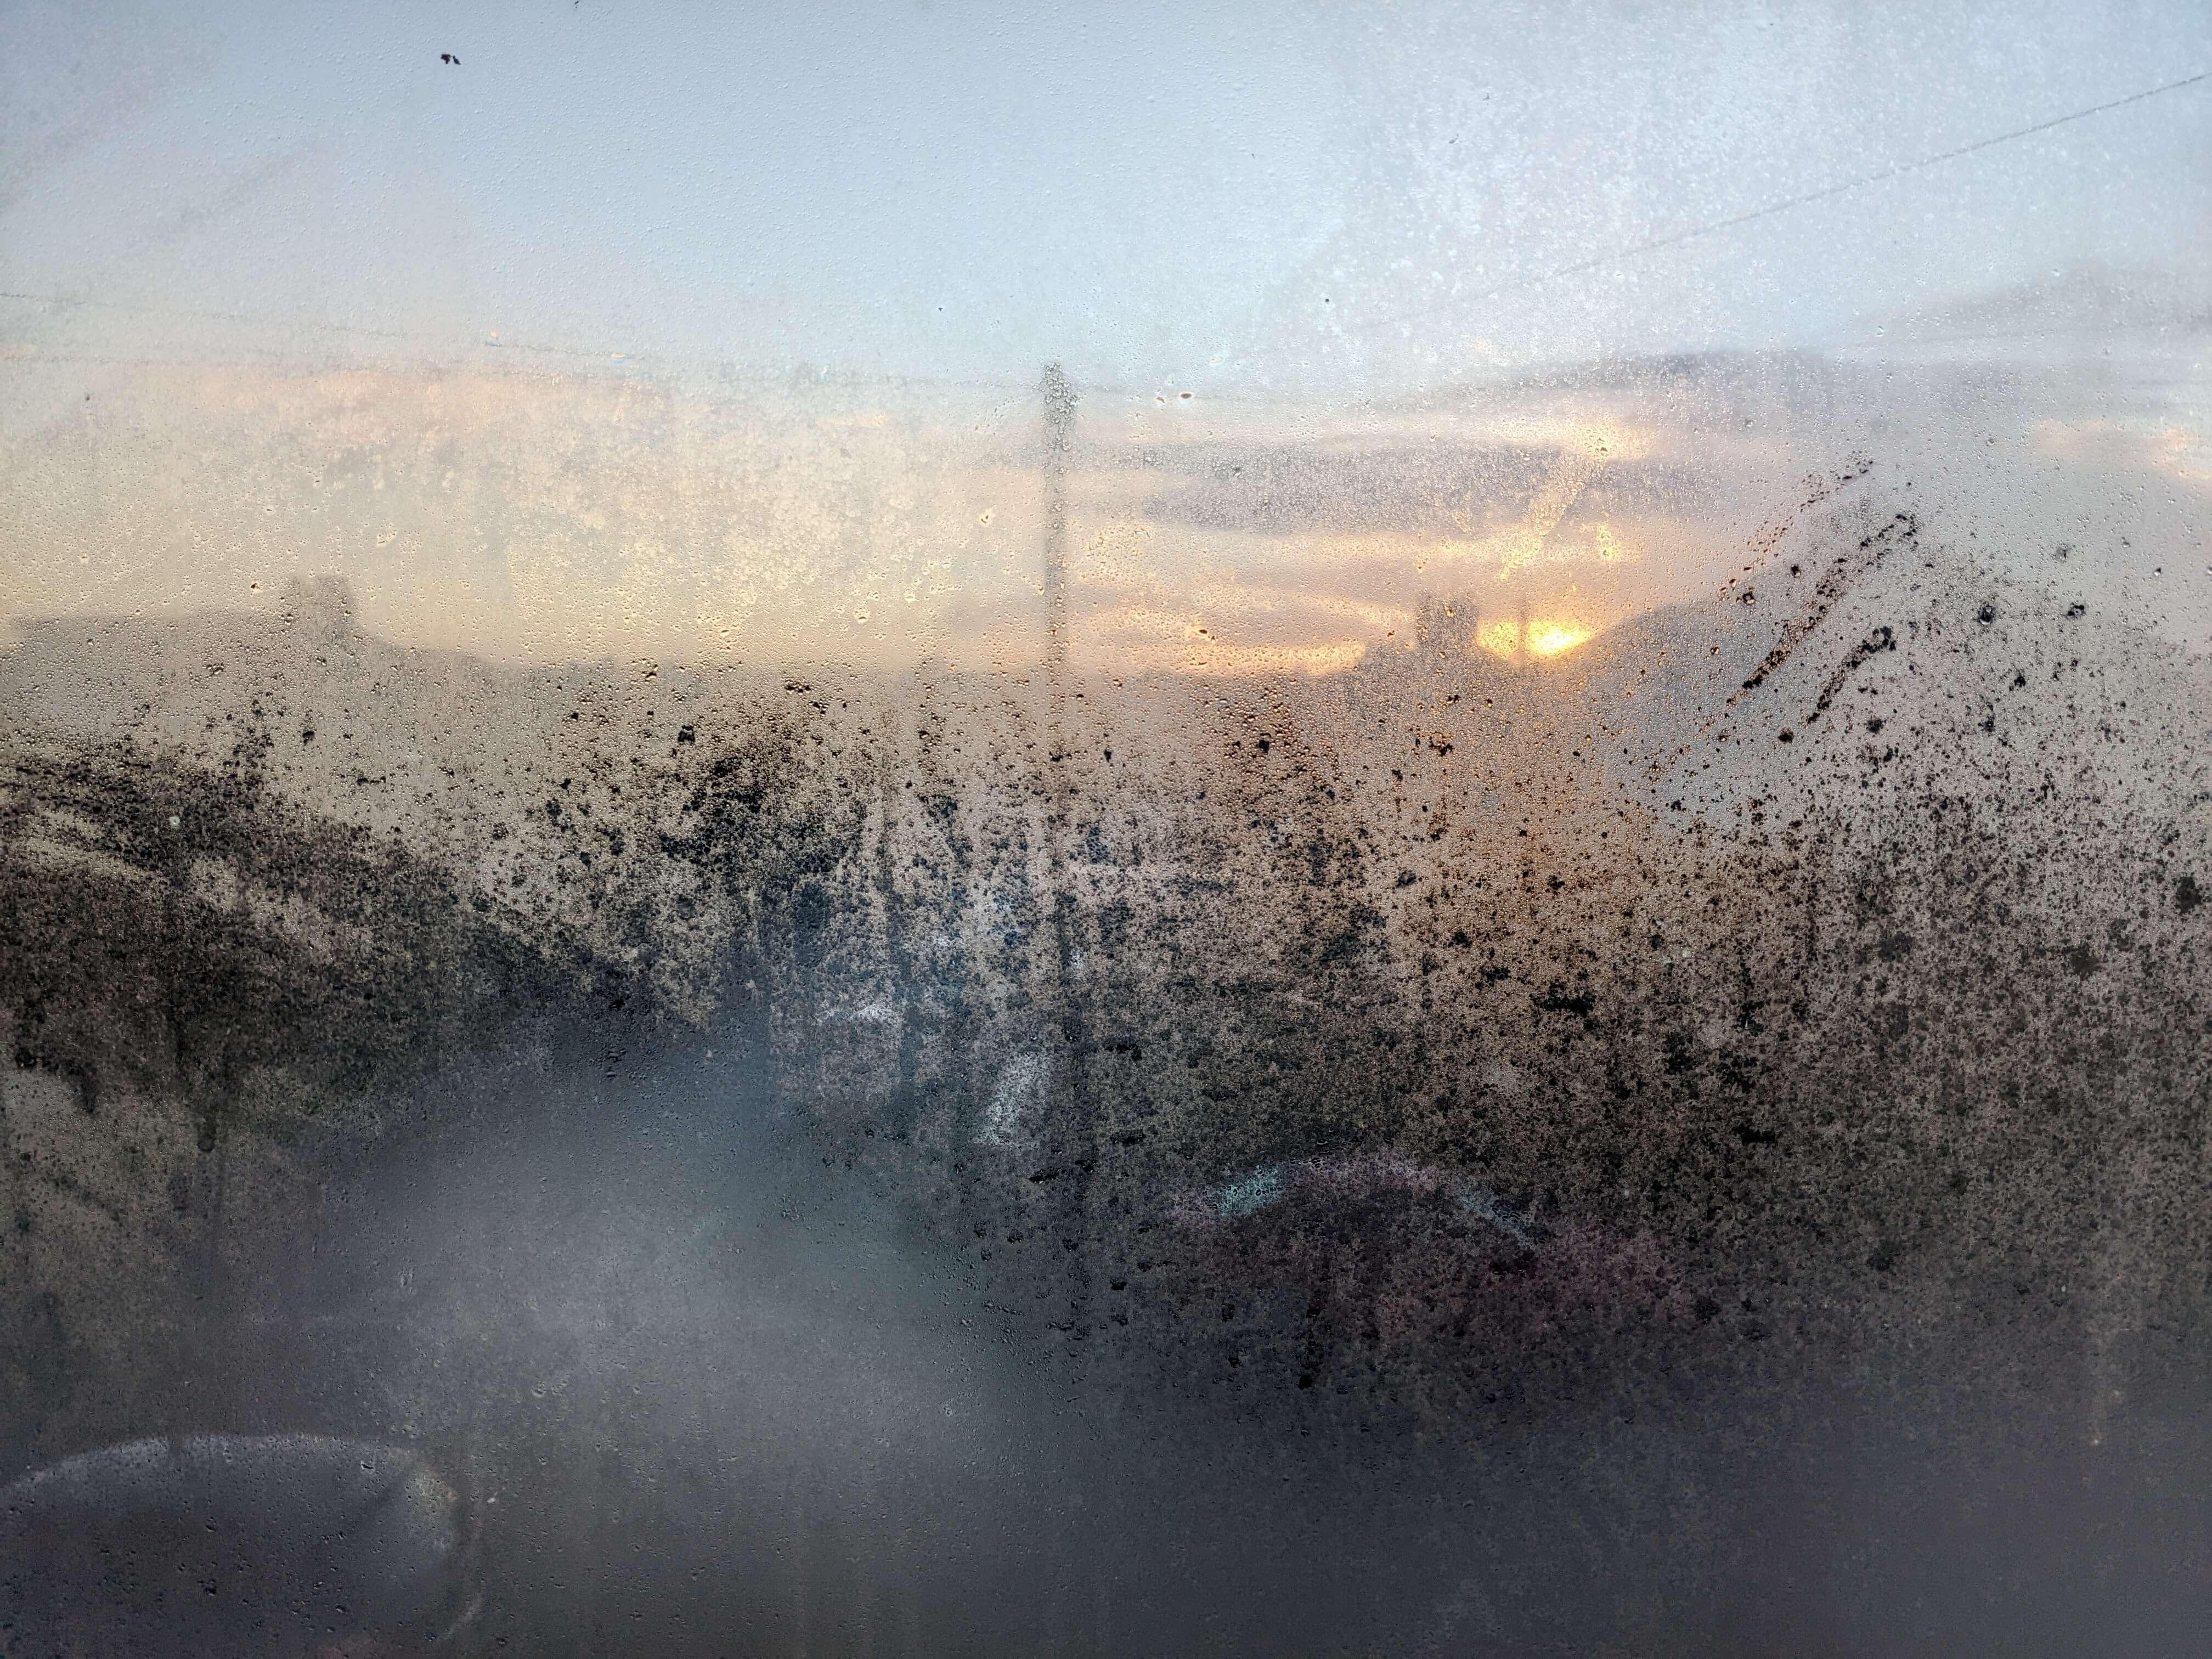 Stop condensation on windows with these expert approved tips and tricks